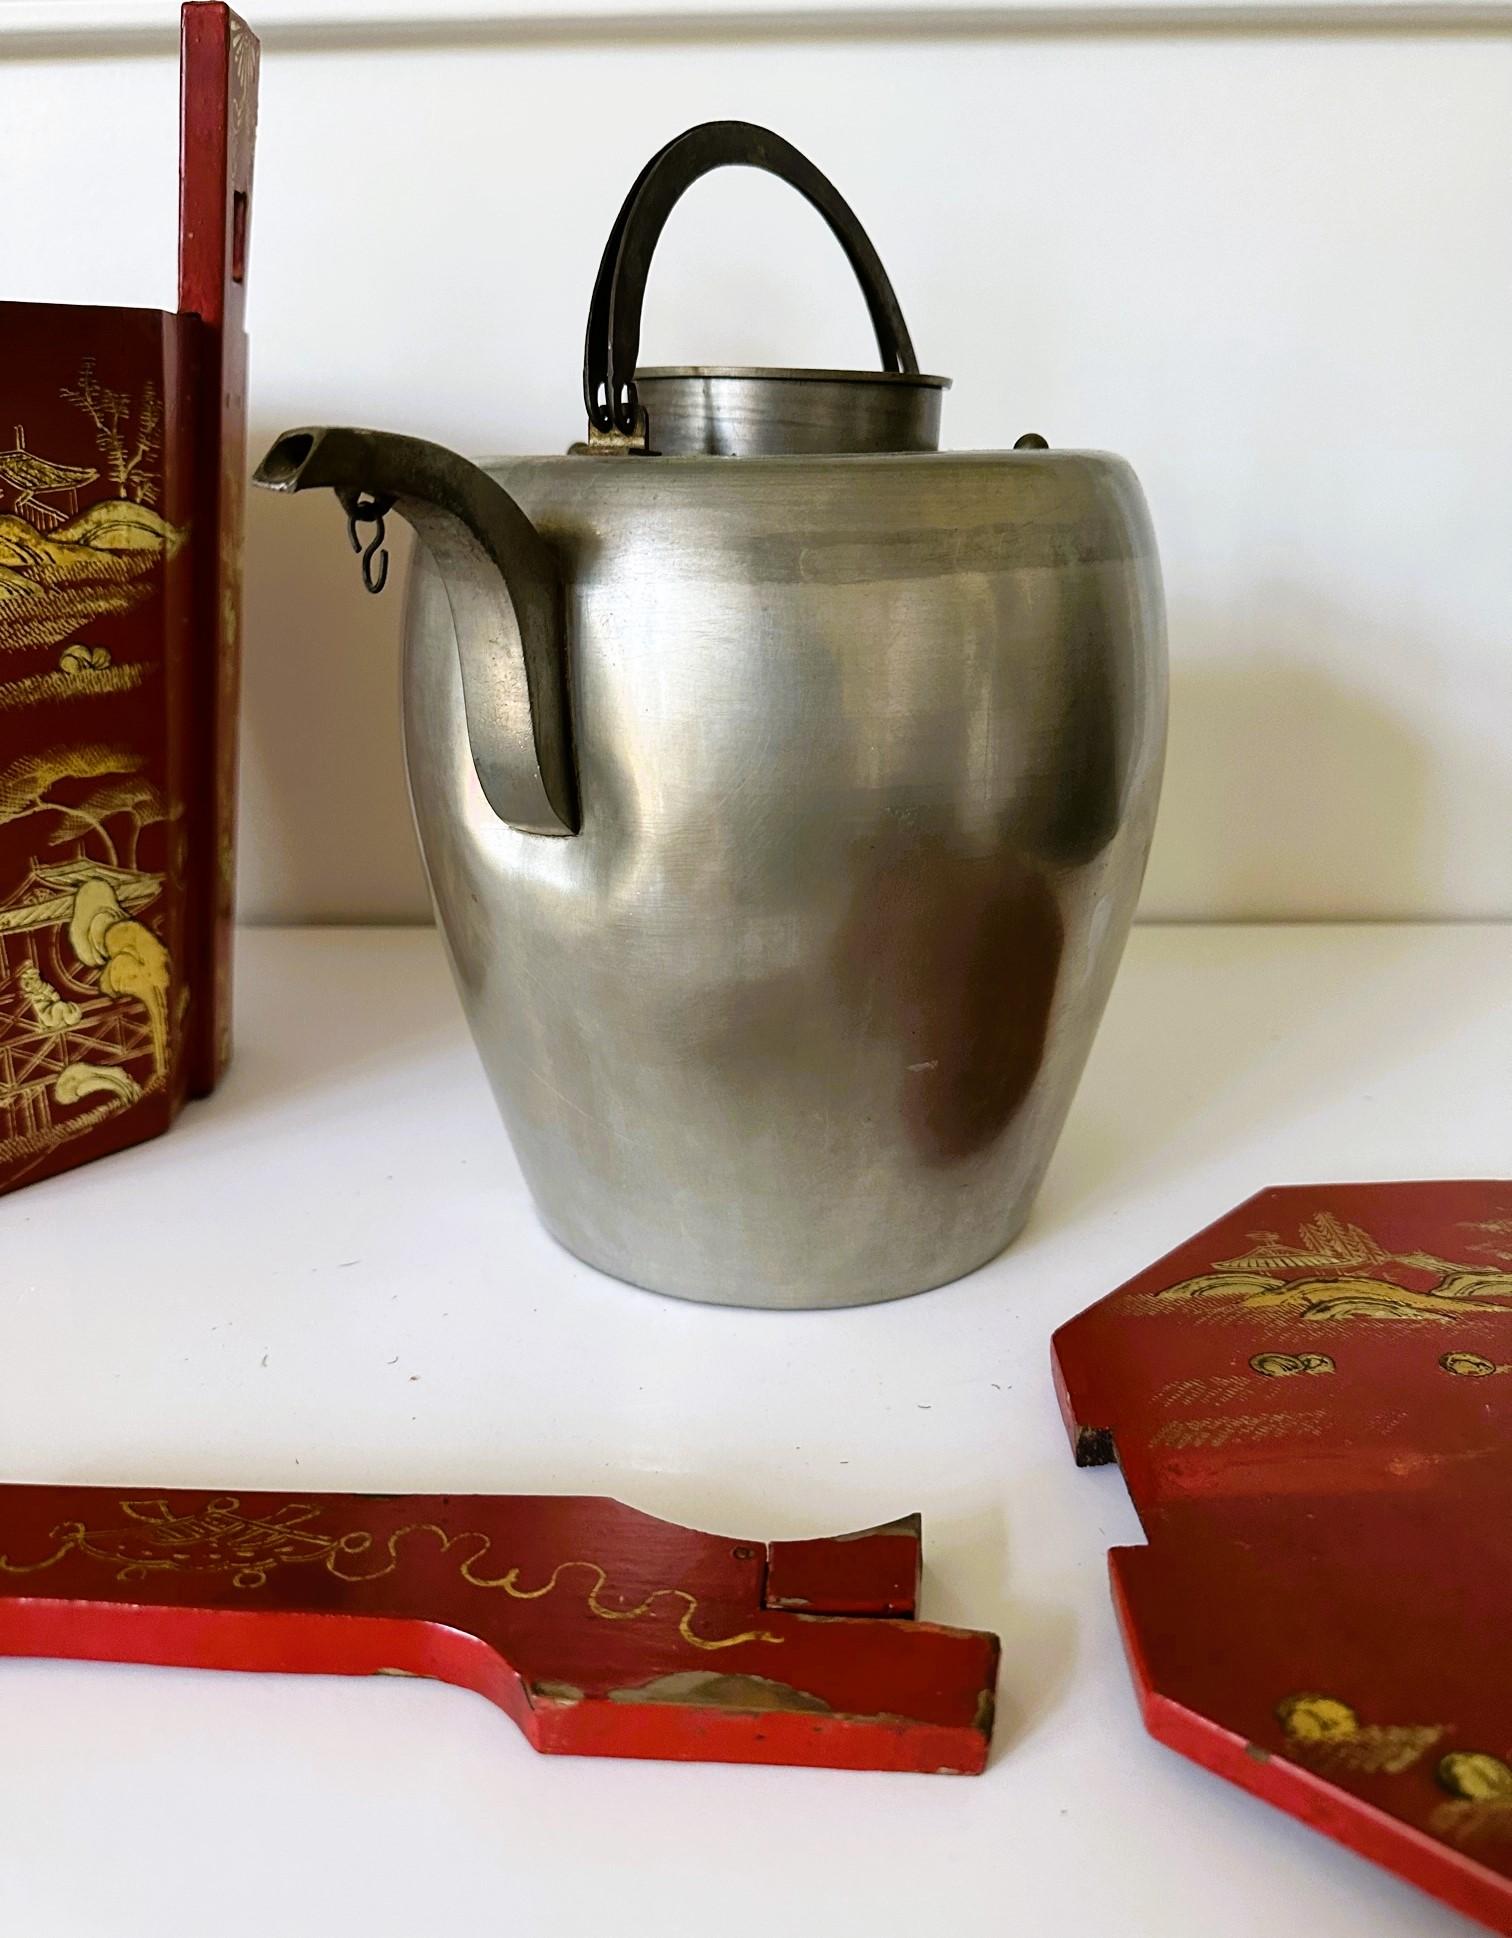 Red and Gold Lacquer Portable Tea Bucket and Cover Ryukyu Kingdom Okinawa In Fair Condition For Sale In Atlanta, GA